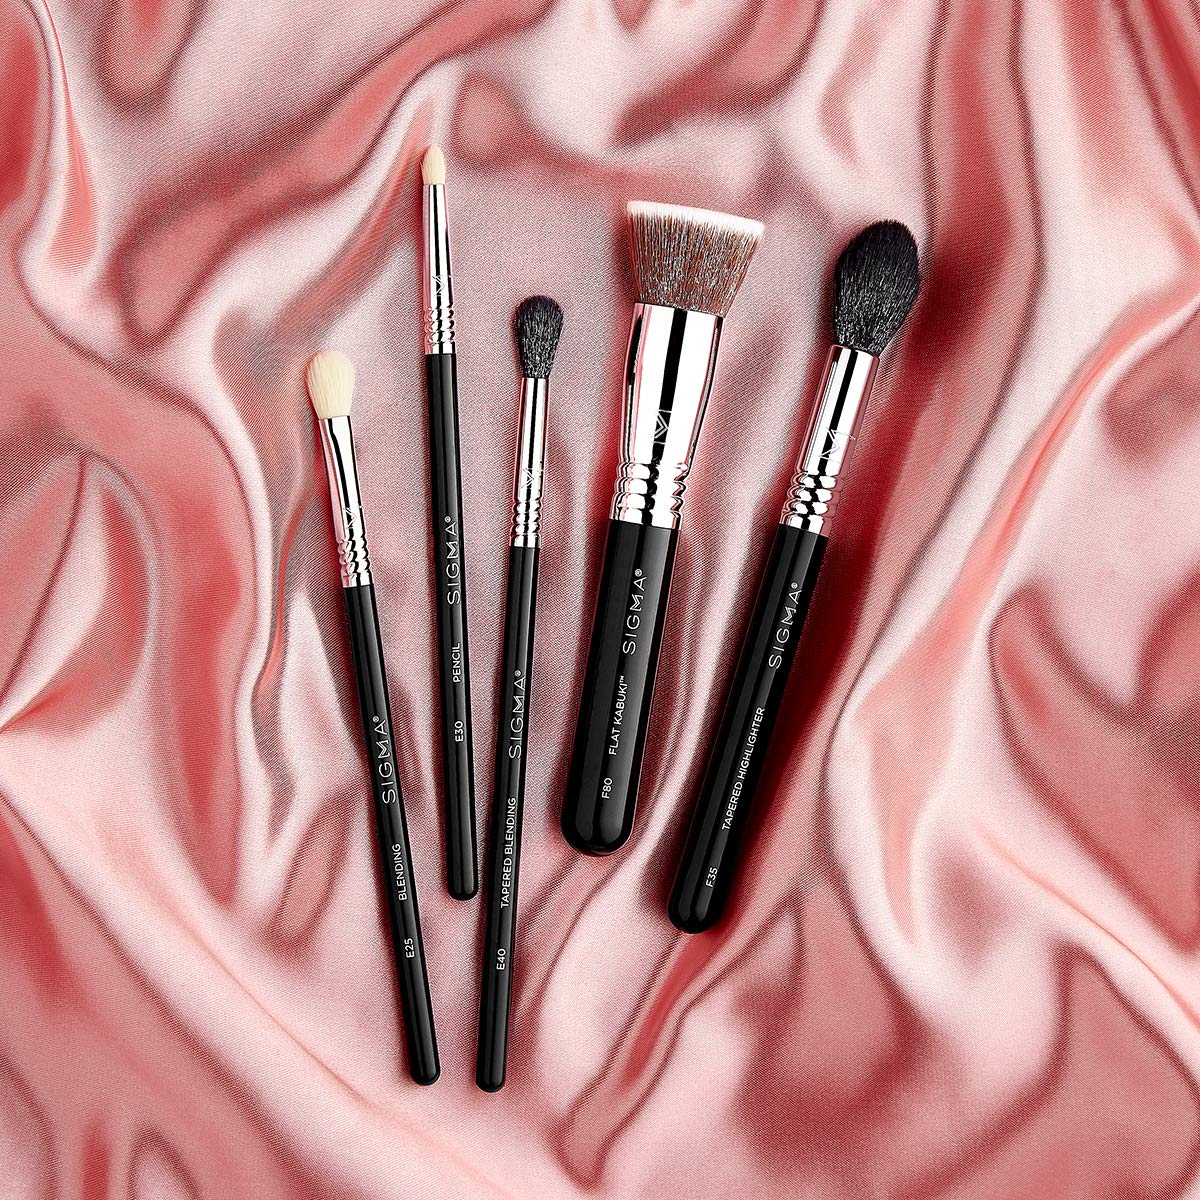 Sigma Most-Wanted Brush Set - Includes 5 of our Favorite Brushes, Perfect for Face & Eye Makeup